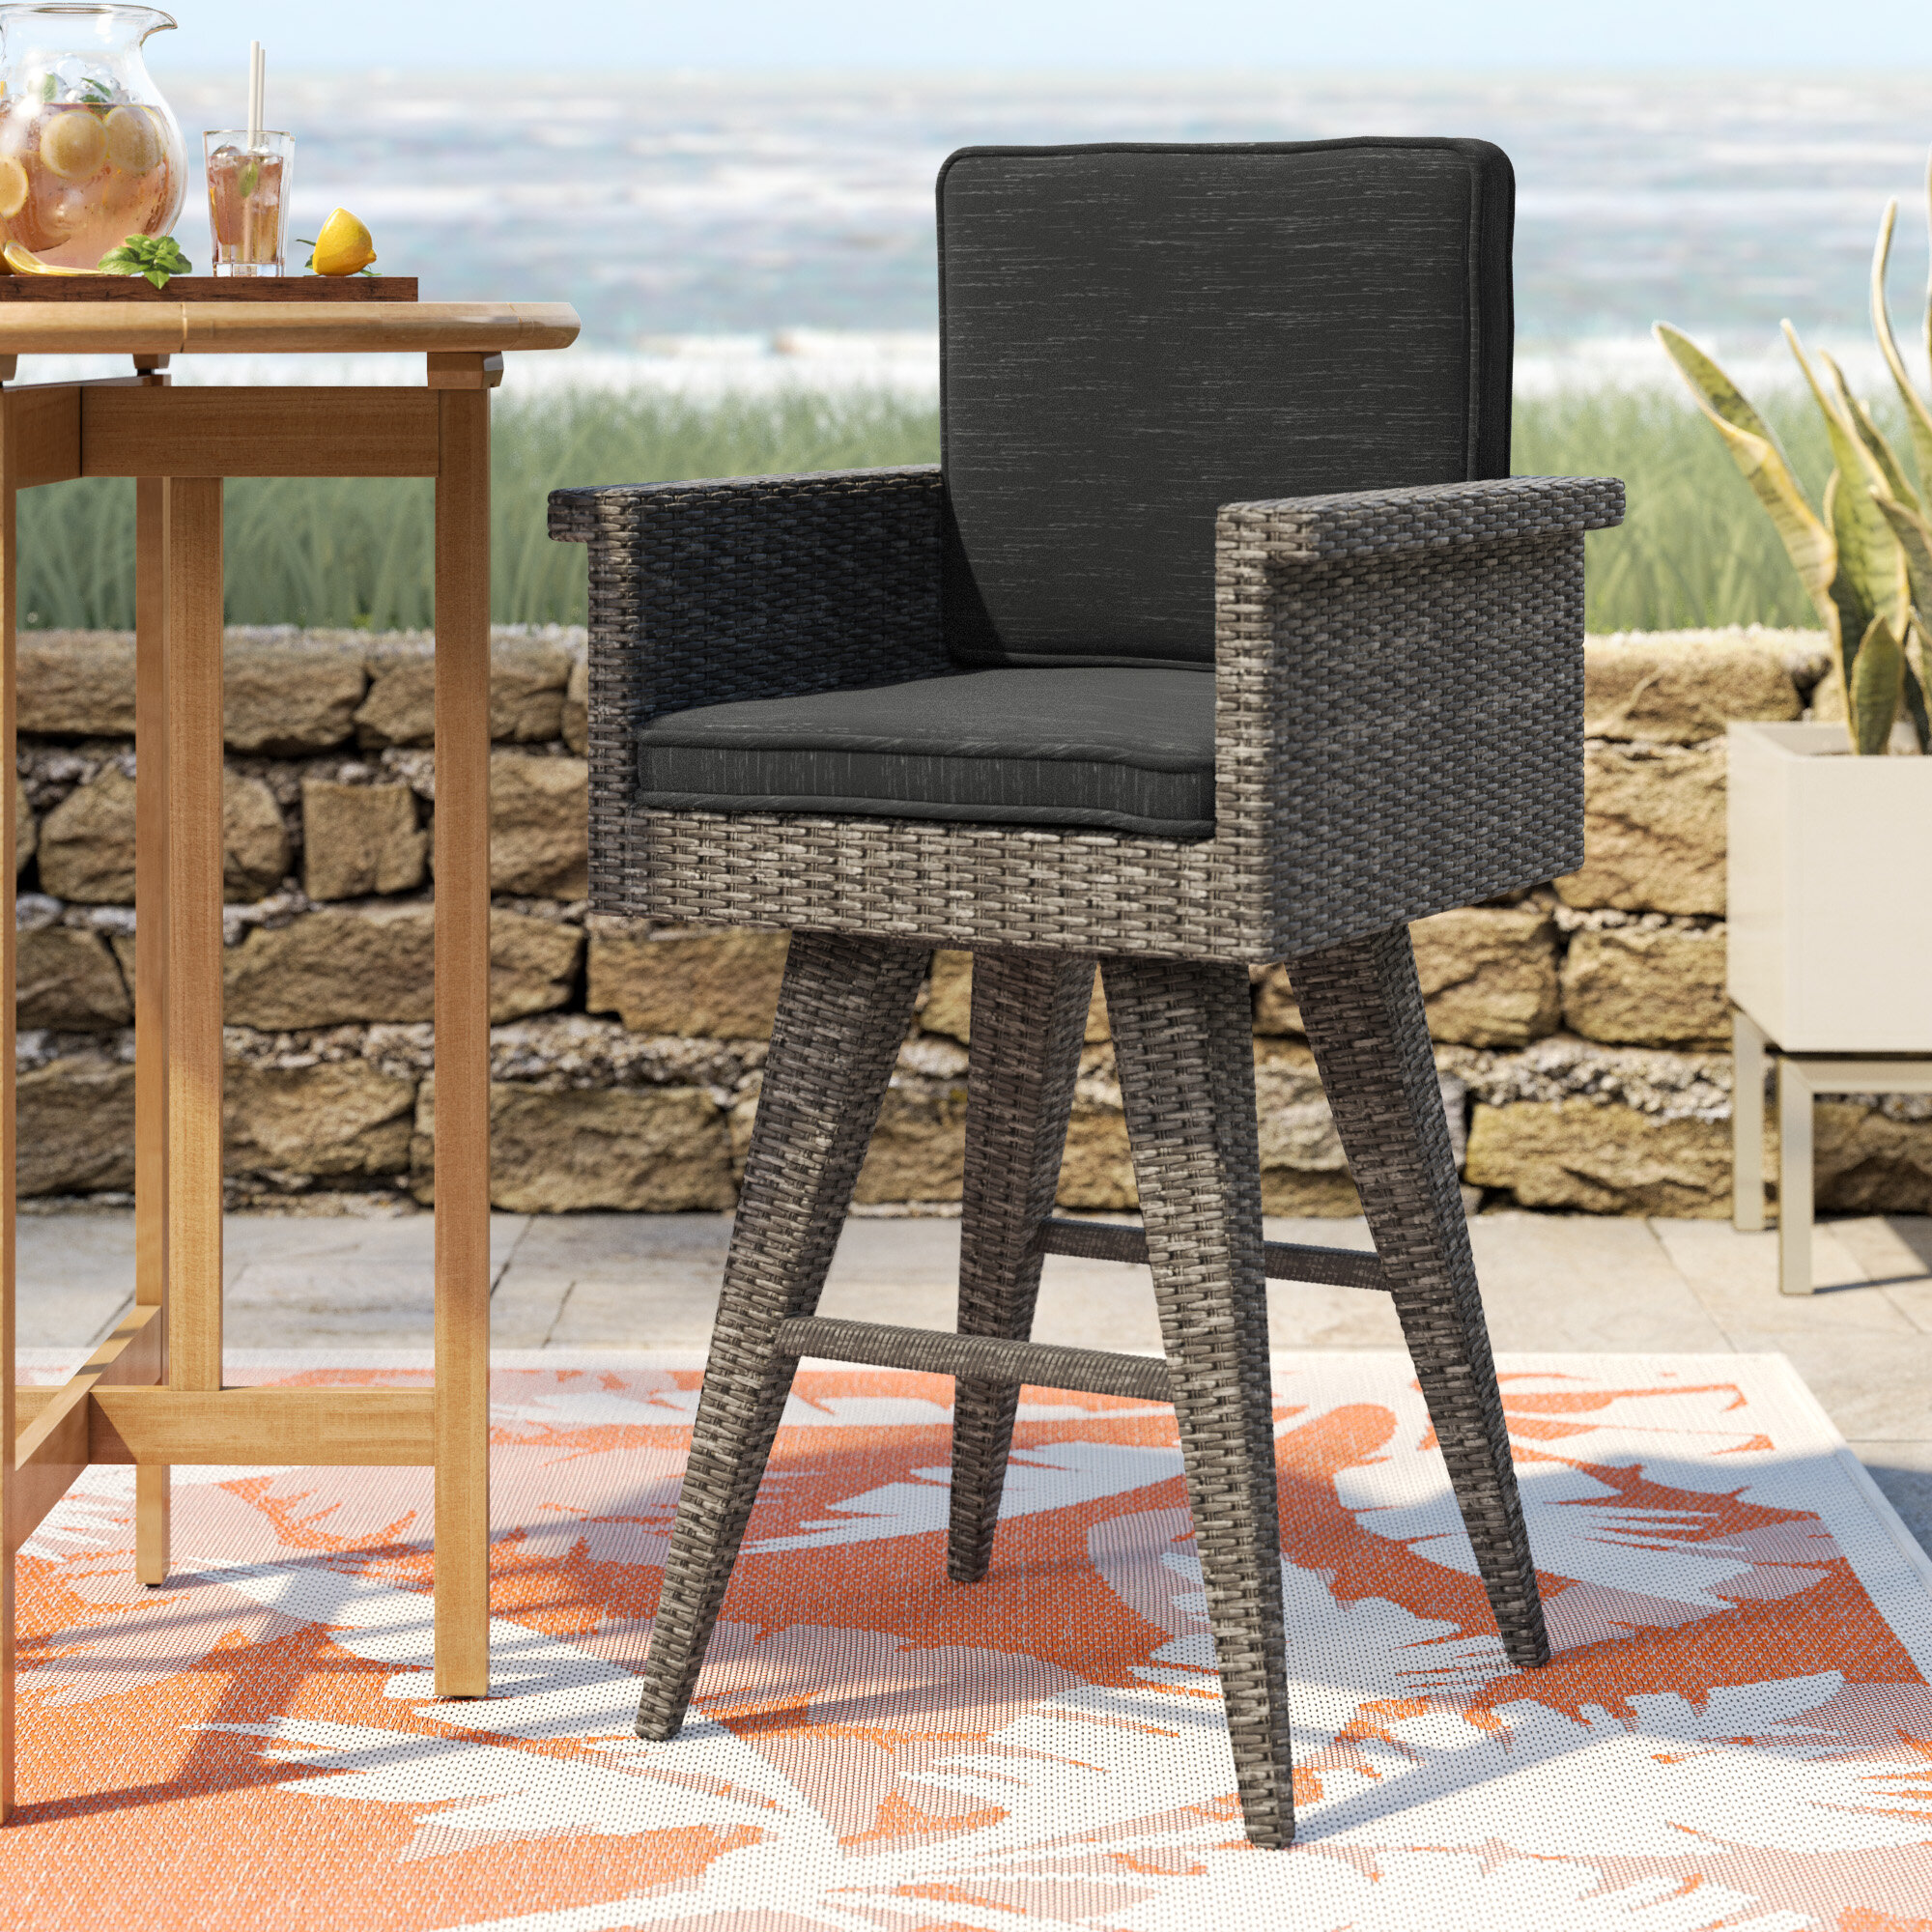 Brown ZENY Wicker Bar Stool with Back Outdoor Rattan Chair Set of 2 Patio All Weather Pool Iron Frame Barstool Furniture w/Armrest 